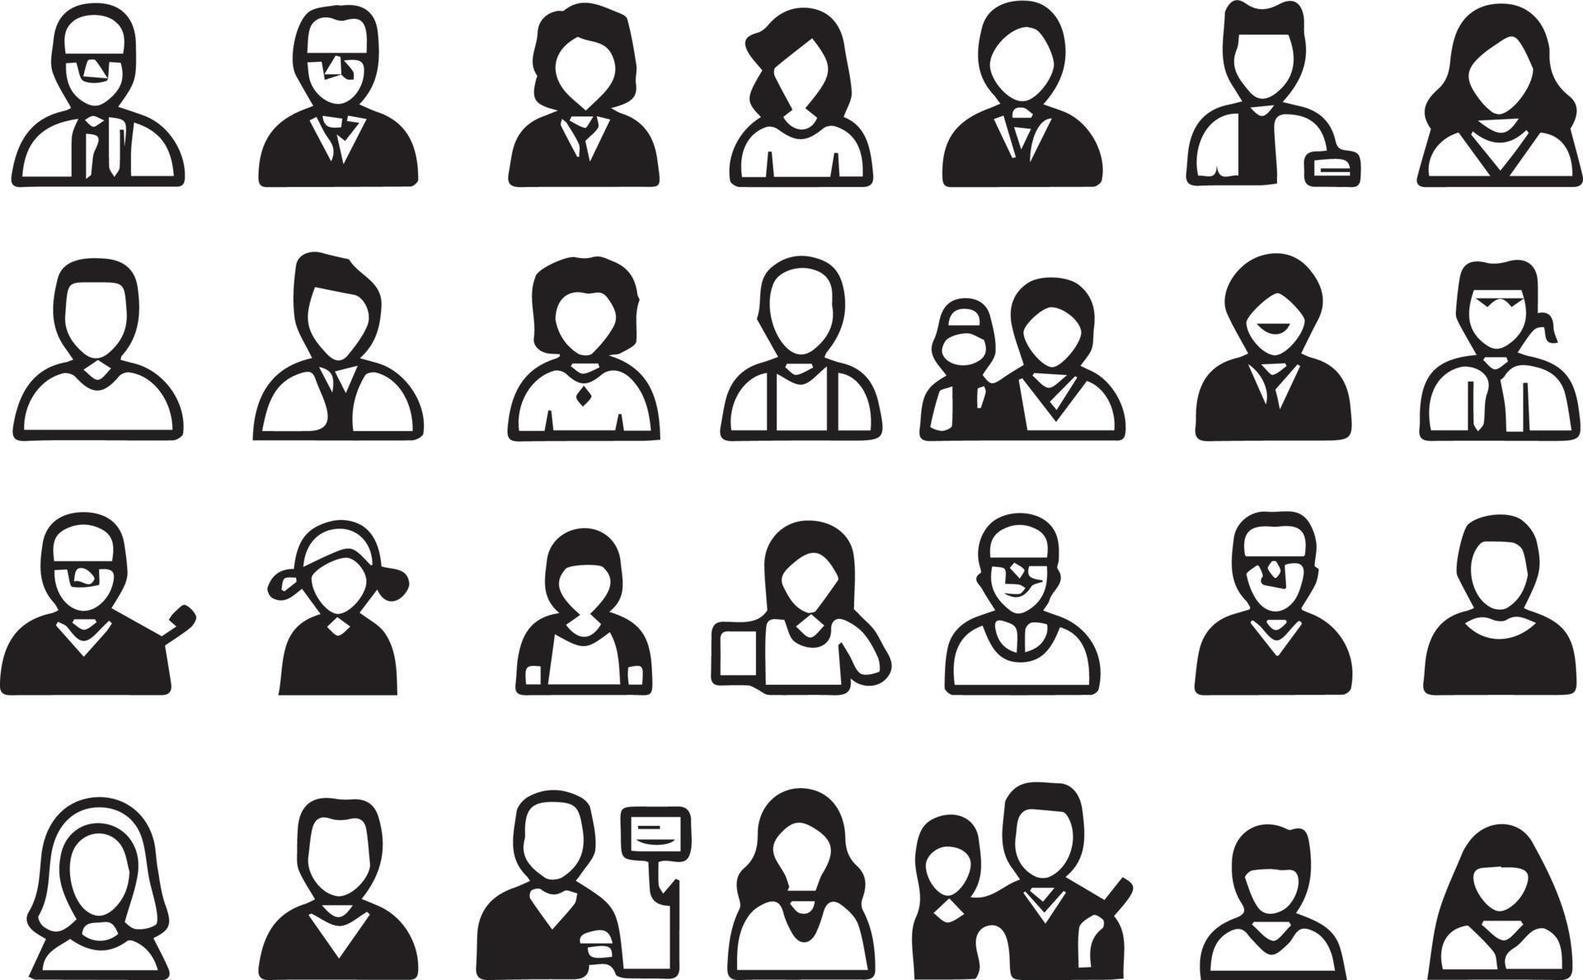 People Avatar Icon Pack vector